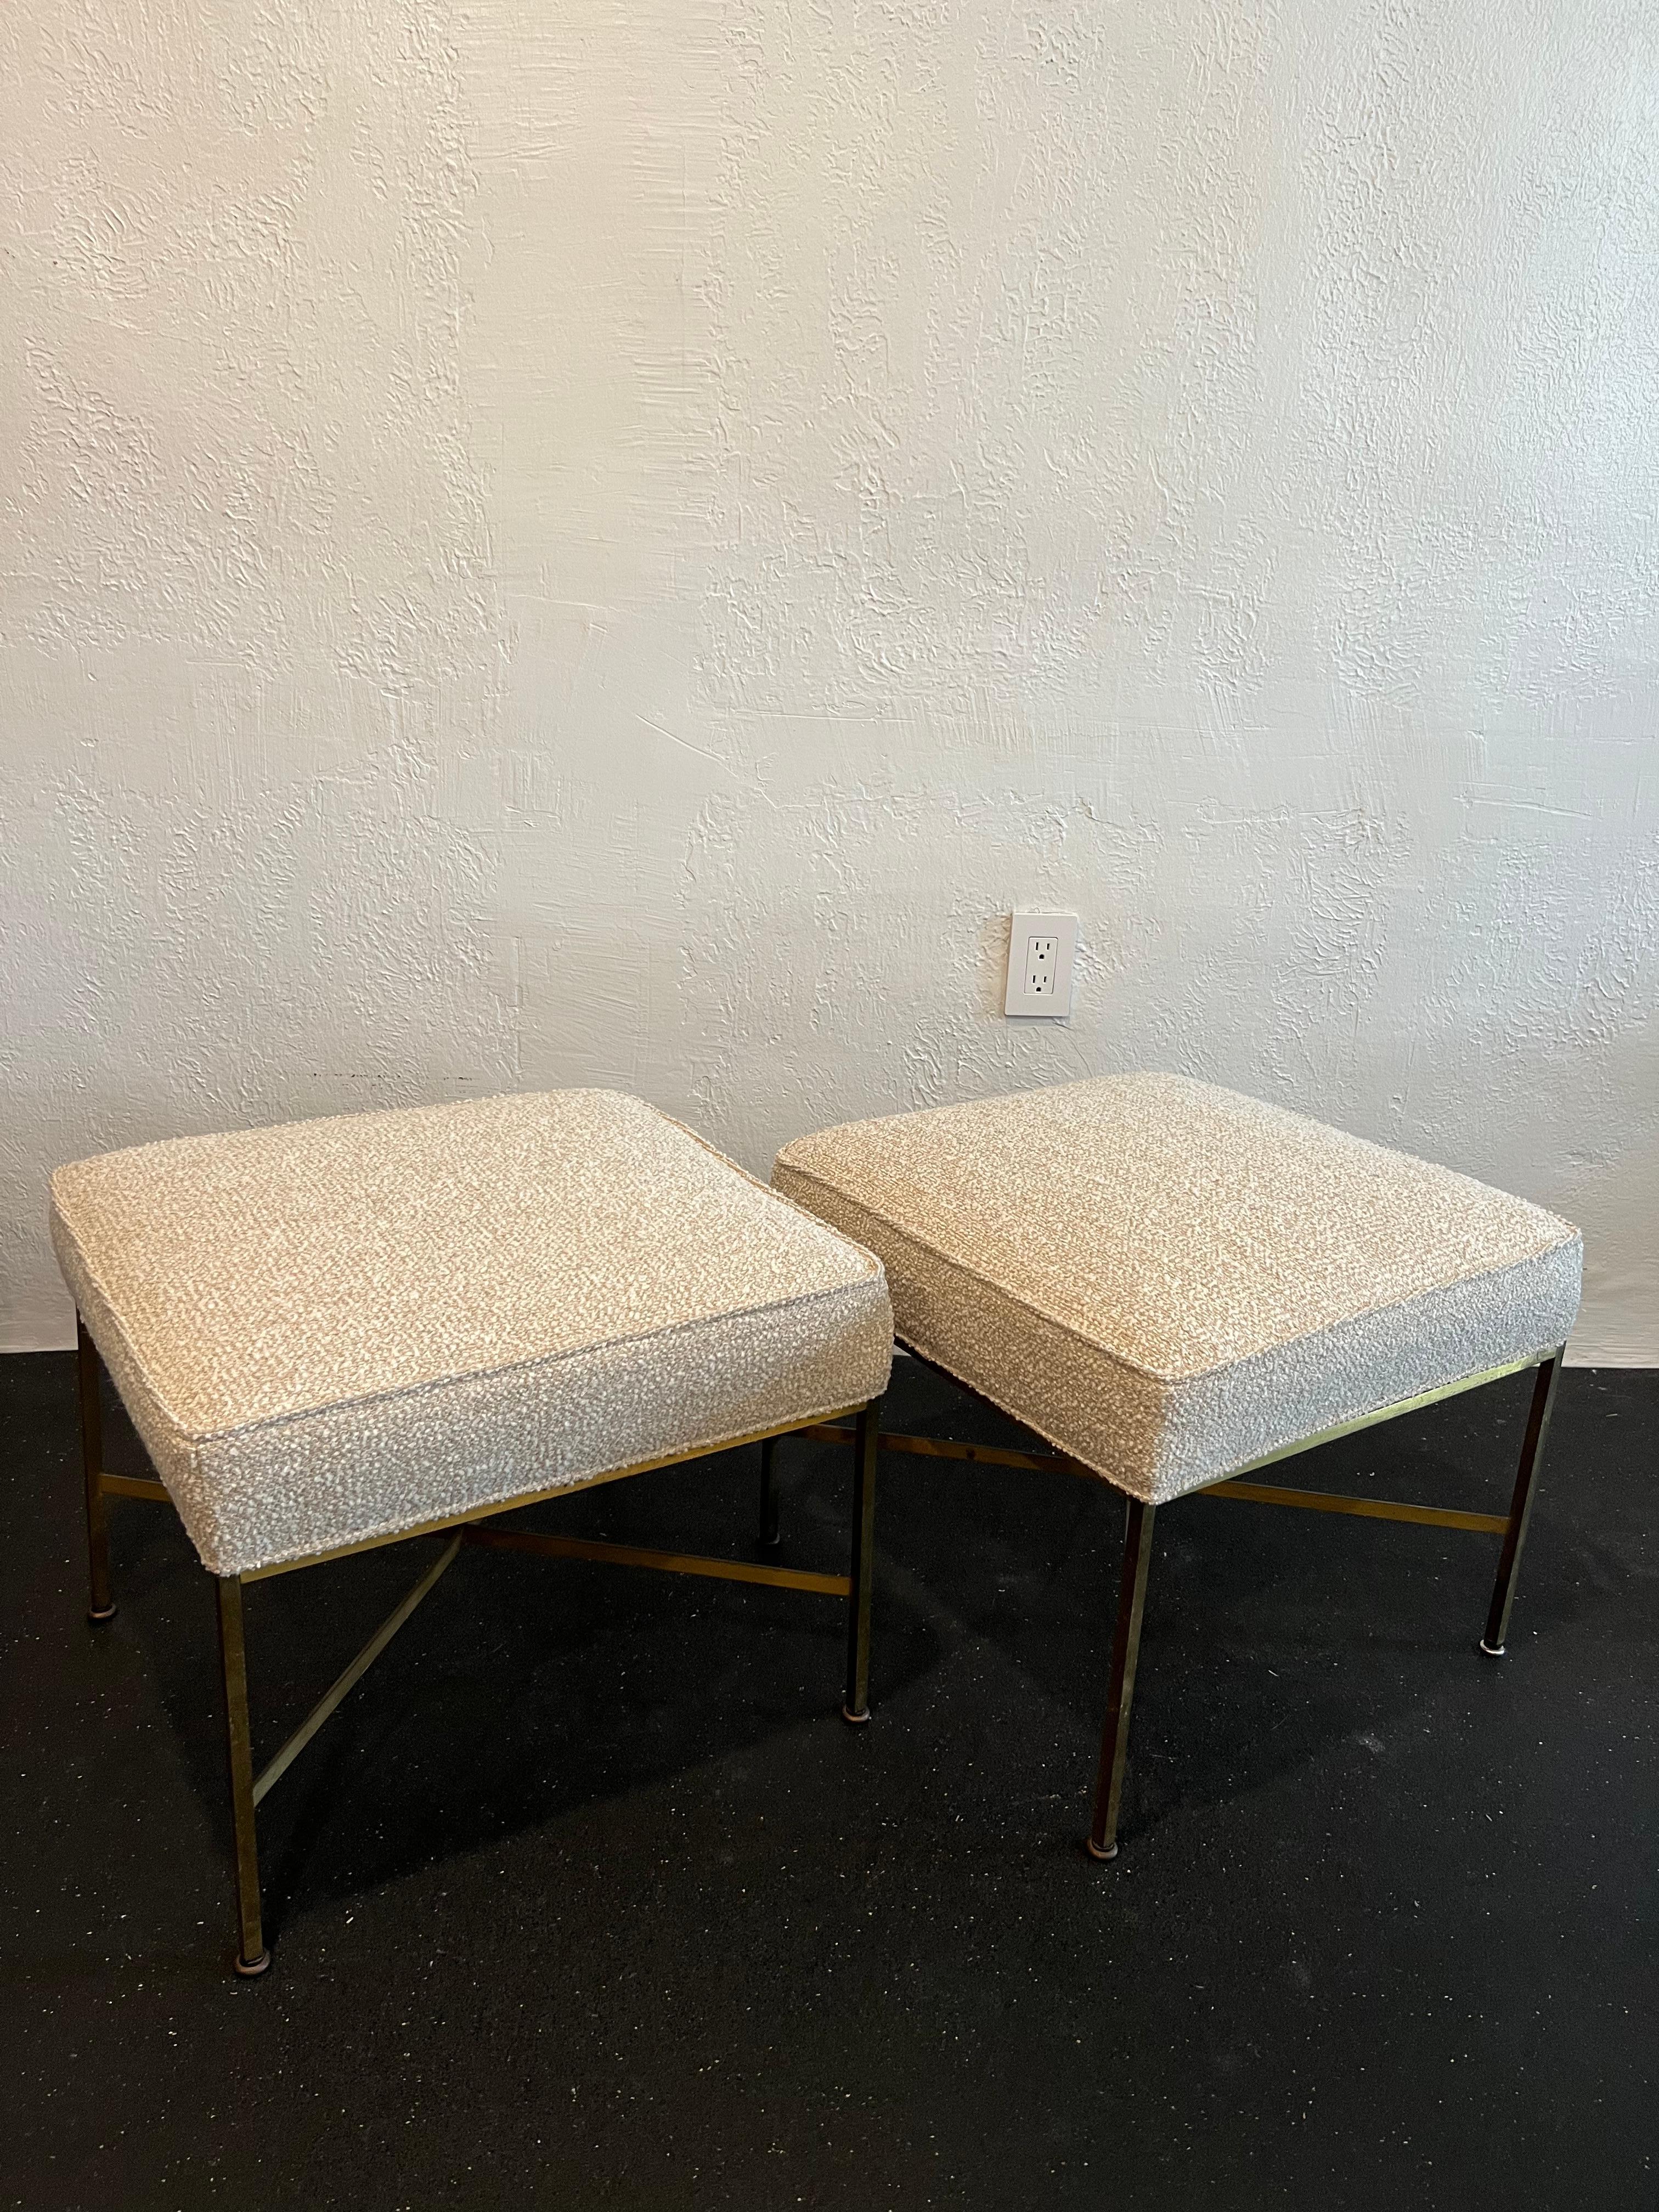 Pair of Paul Mccobb brass x-base stools. Reupholstered in an earth toned boucle. Beautiful patina to the brass frame. A few hairline fractures near the bottoms of the legs typical with these stools and 3 glides have been replaced throughout the